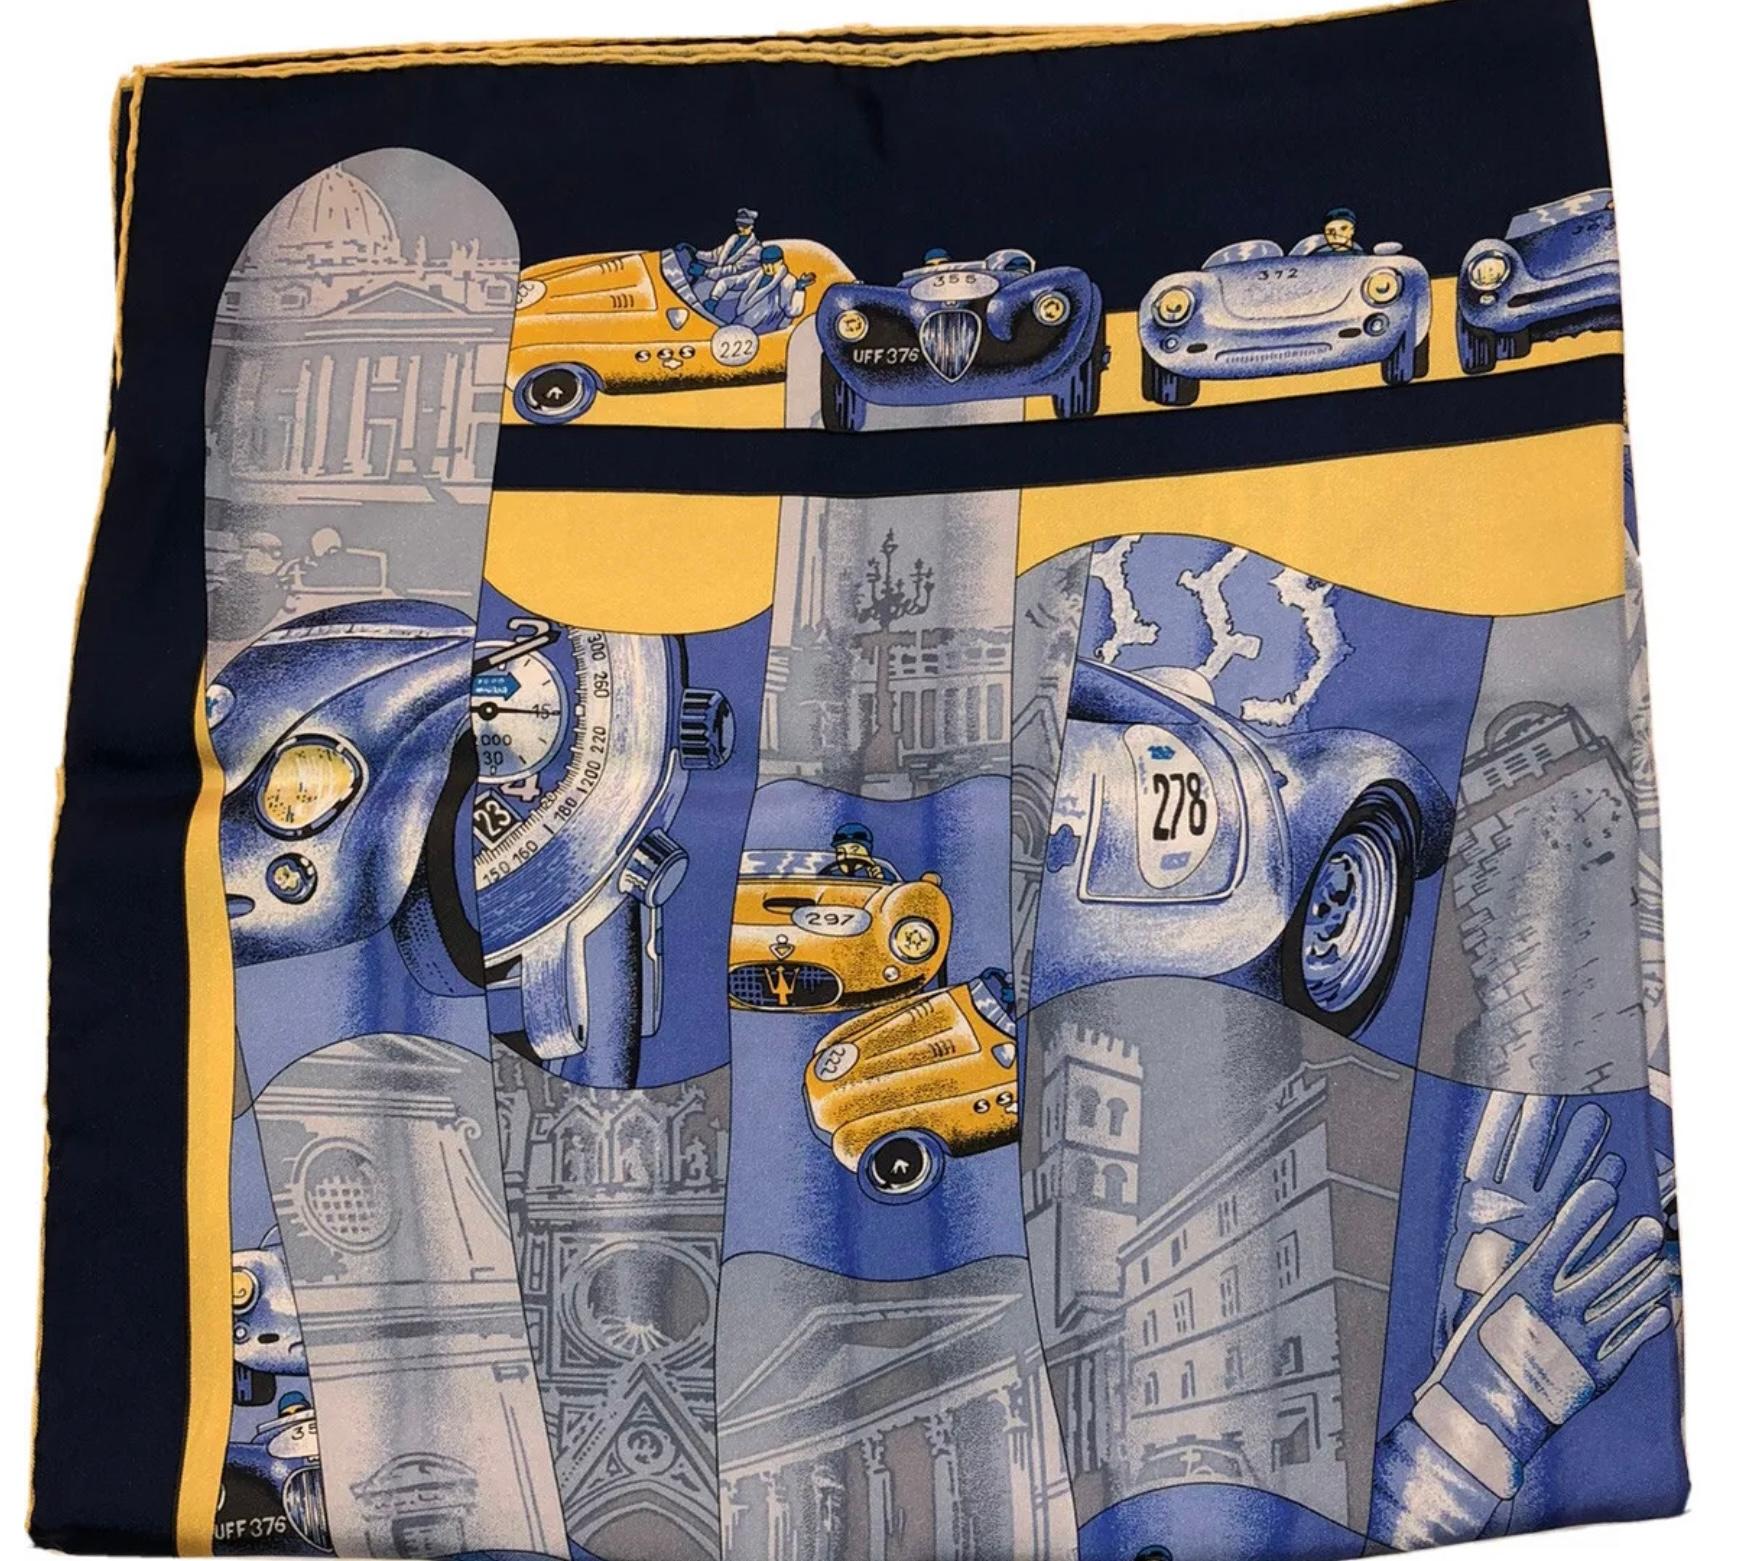 Chopard Silk Scarf Foulard Rallye Blue W/ Cars Concours d’Elegance inspired

Made in France  100% Silk  90cm \ 35in Square

Dry Clean Only. Gently Used with Box

Foxy Couture is not an authorized reseller nor affiliated with any of the brands we